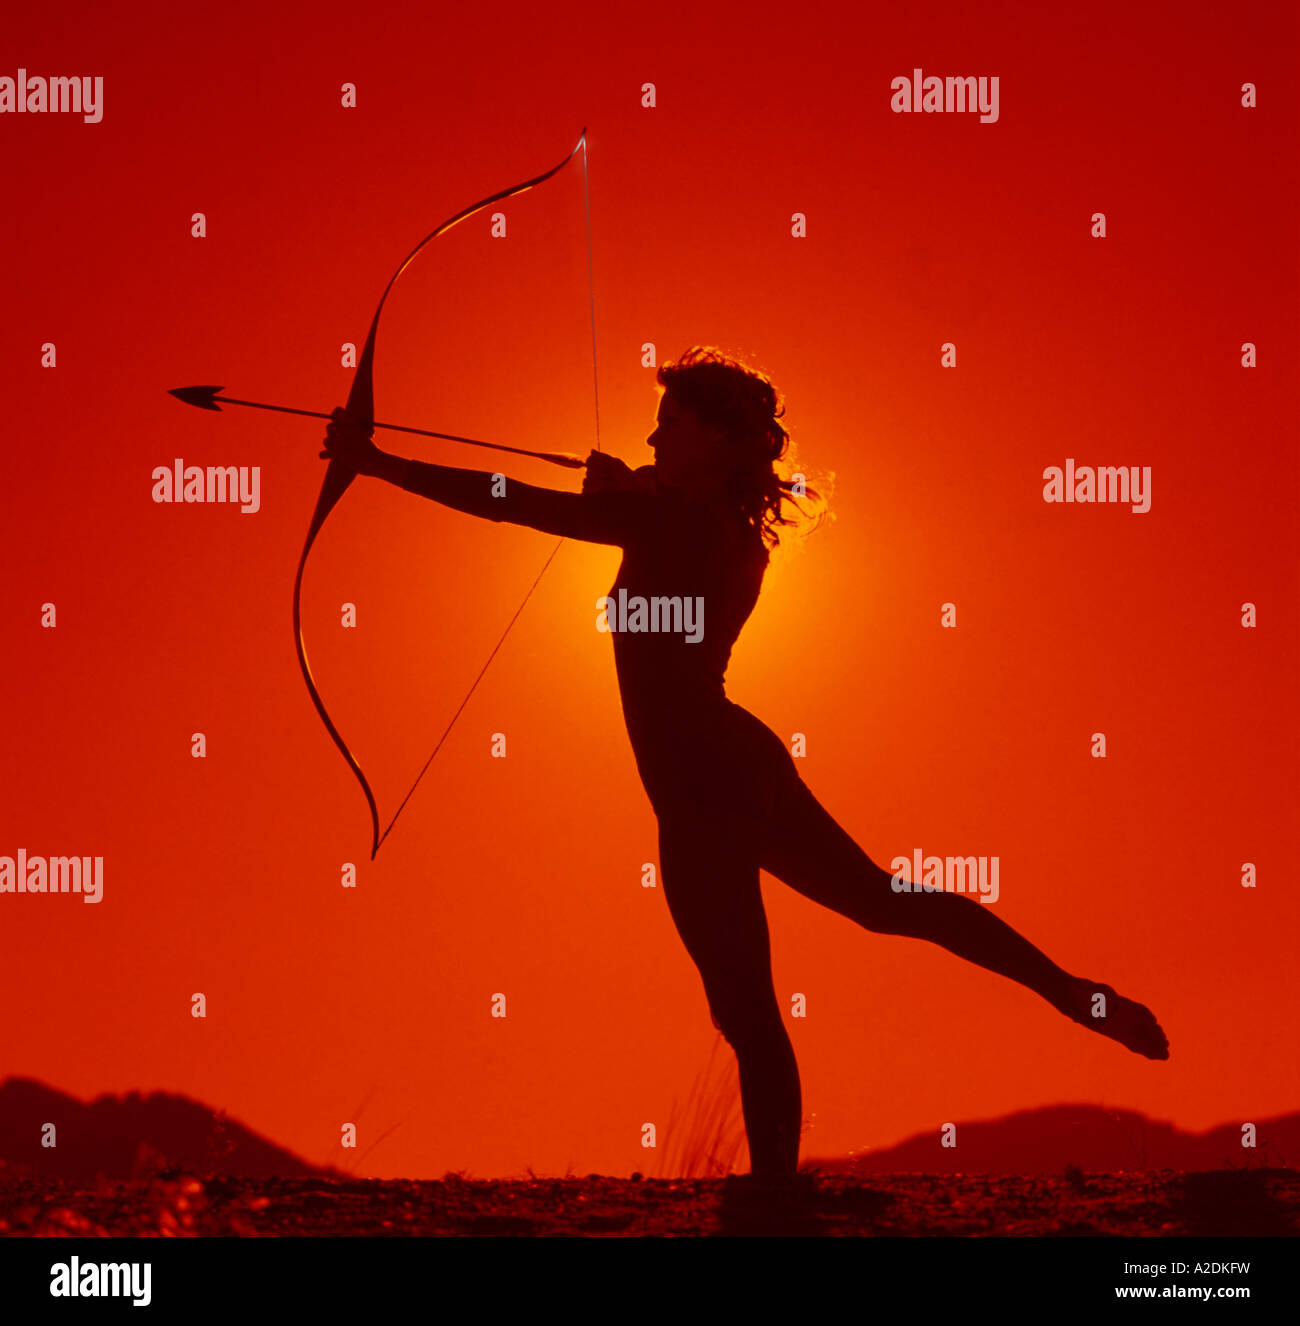 young girl posing in a ballet type pose while holding a boy and arrow A2DKFW